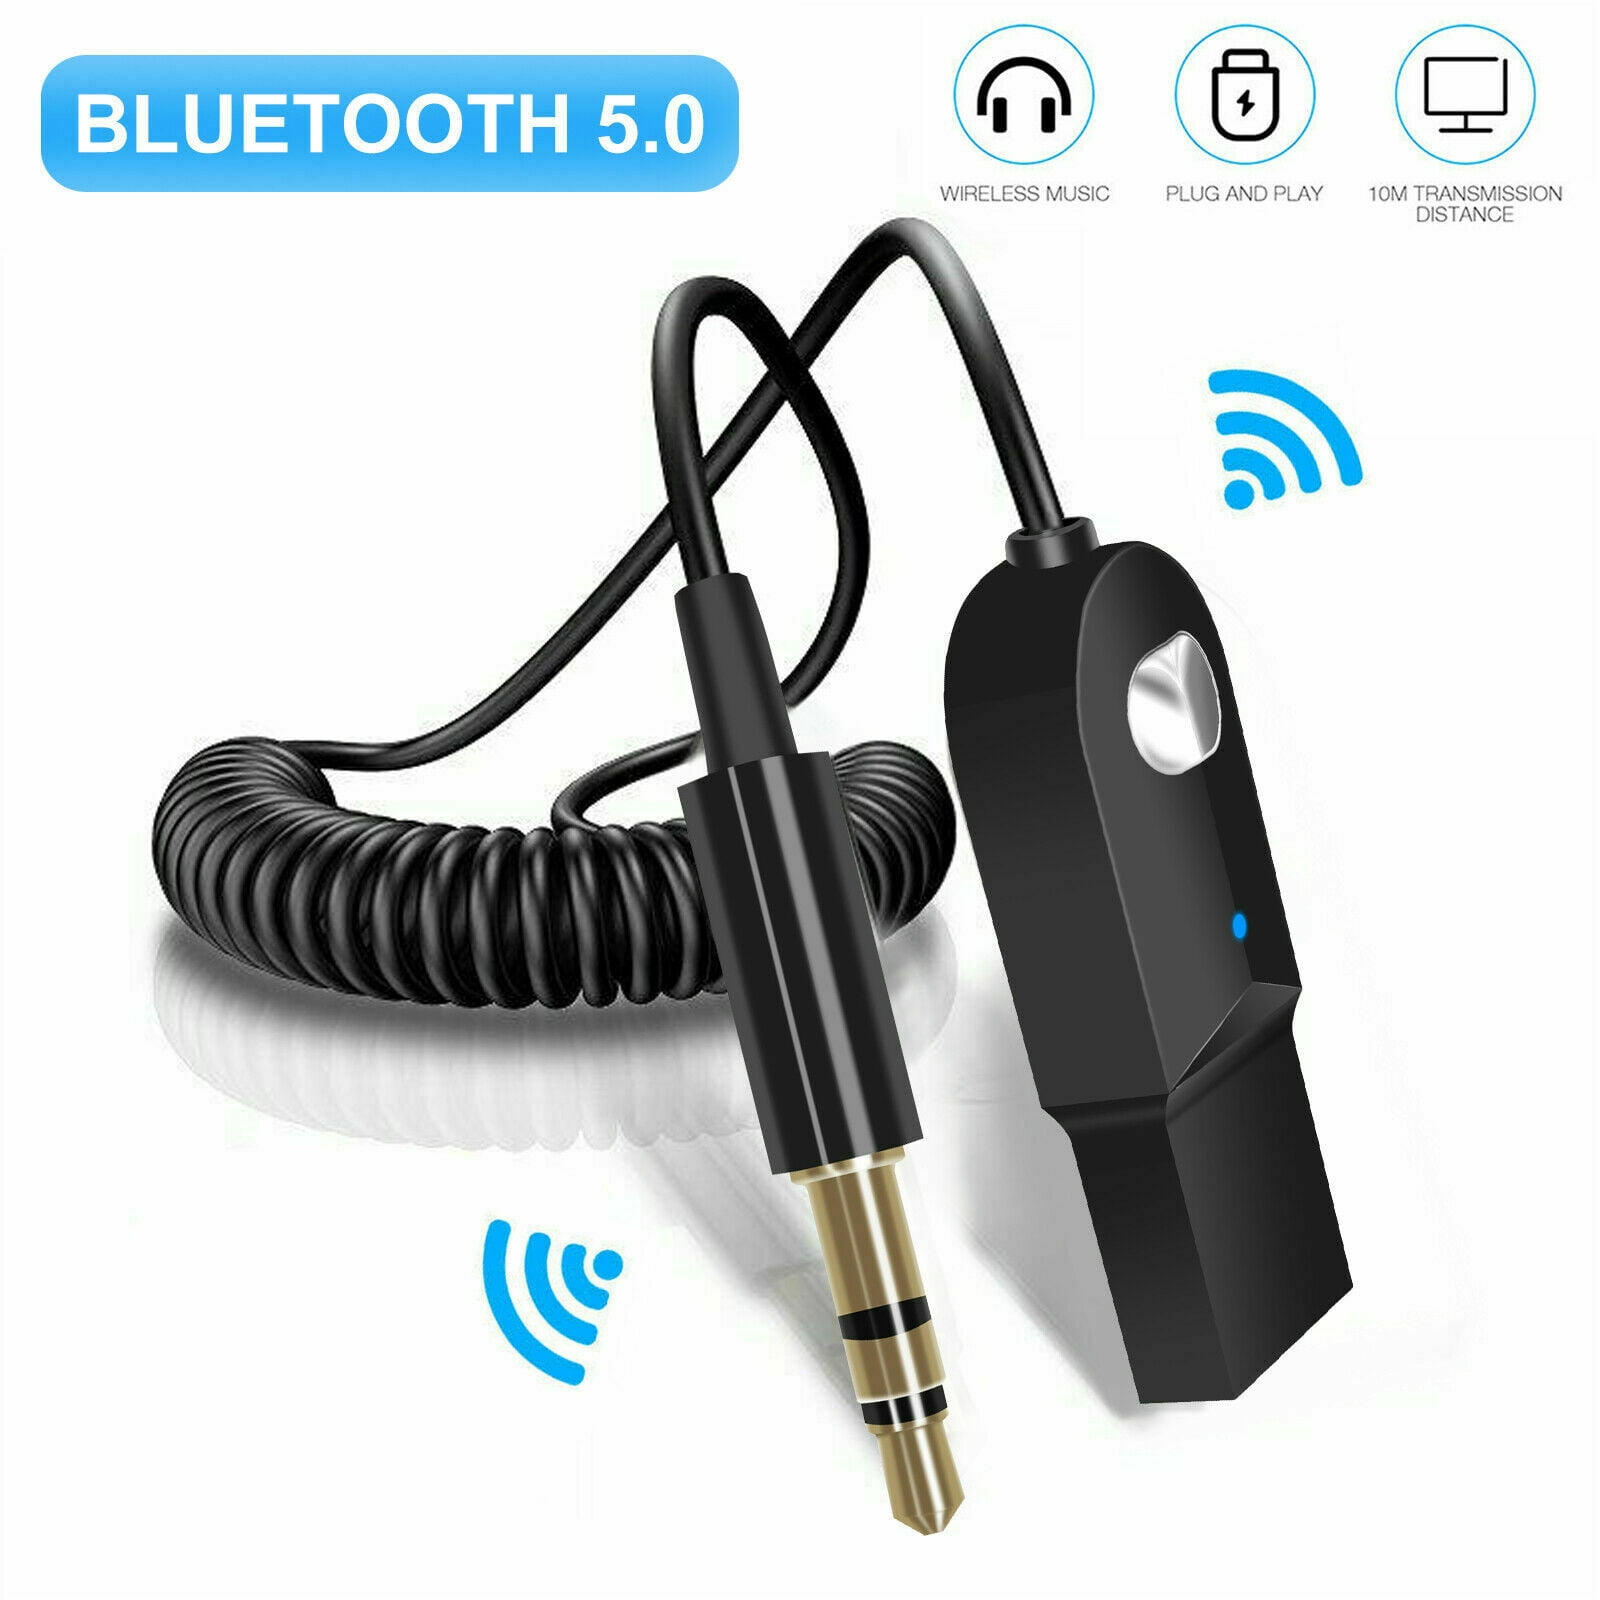 ELEGIANT Bluetooth 5.0 Receiver Wireless Audio Adapter Support AptX LL 3.5 mm Audio Receiver with Built-in Mic for HiFi Stereo System Car Speakers Headphones Home Music Streaming Sound System 